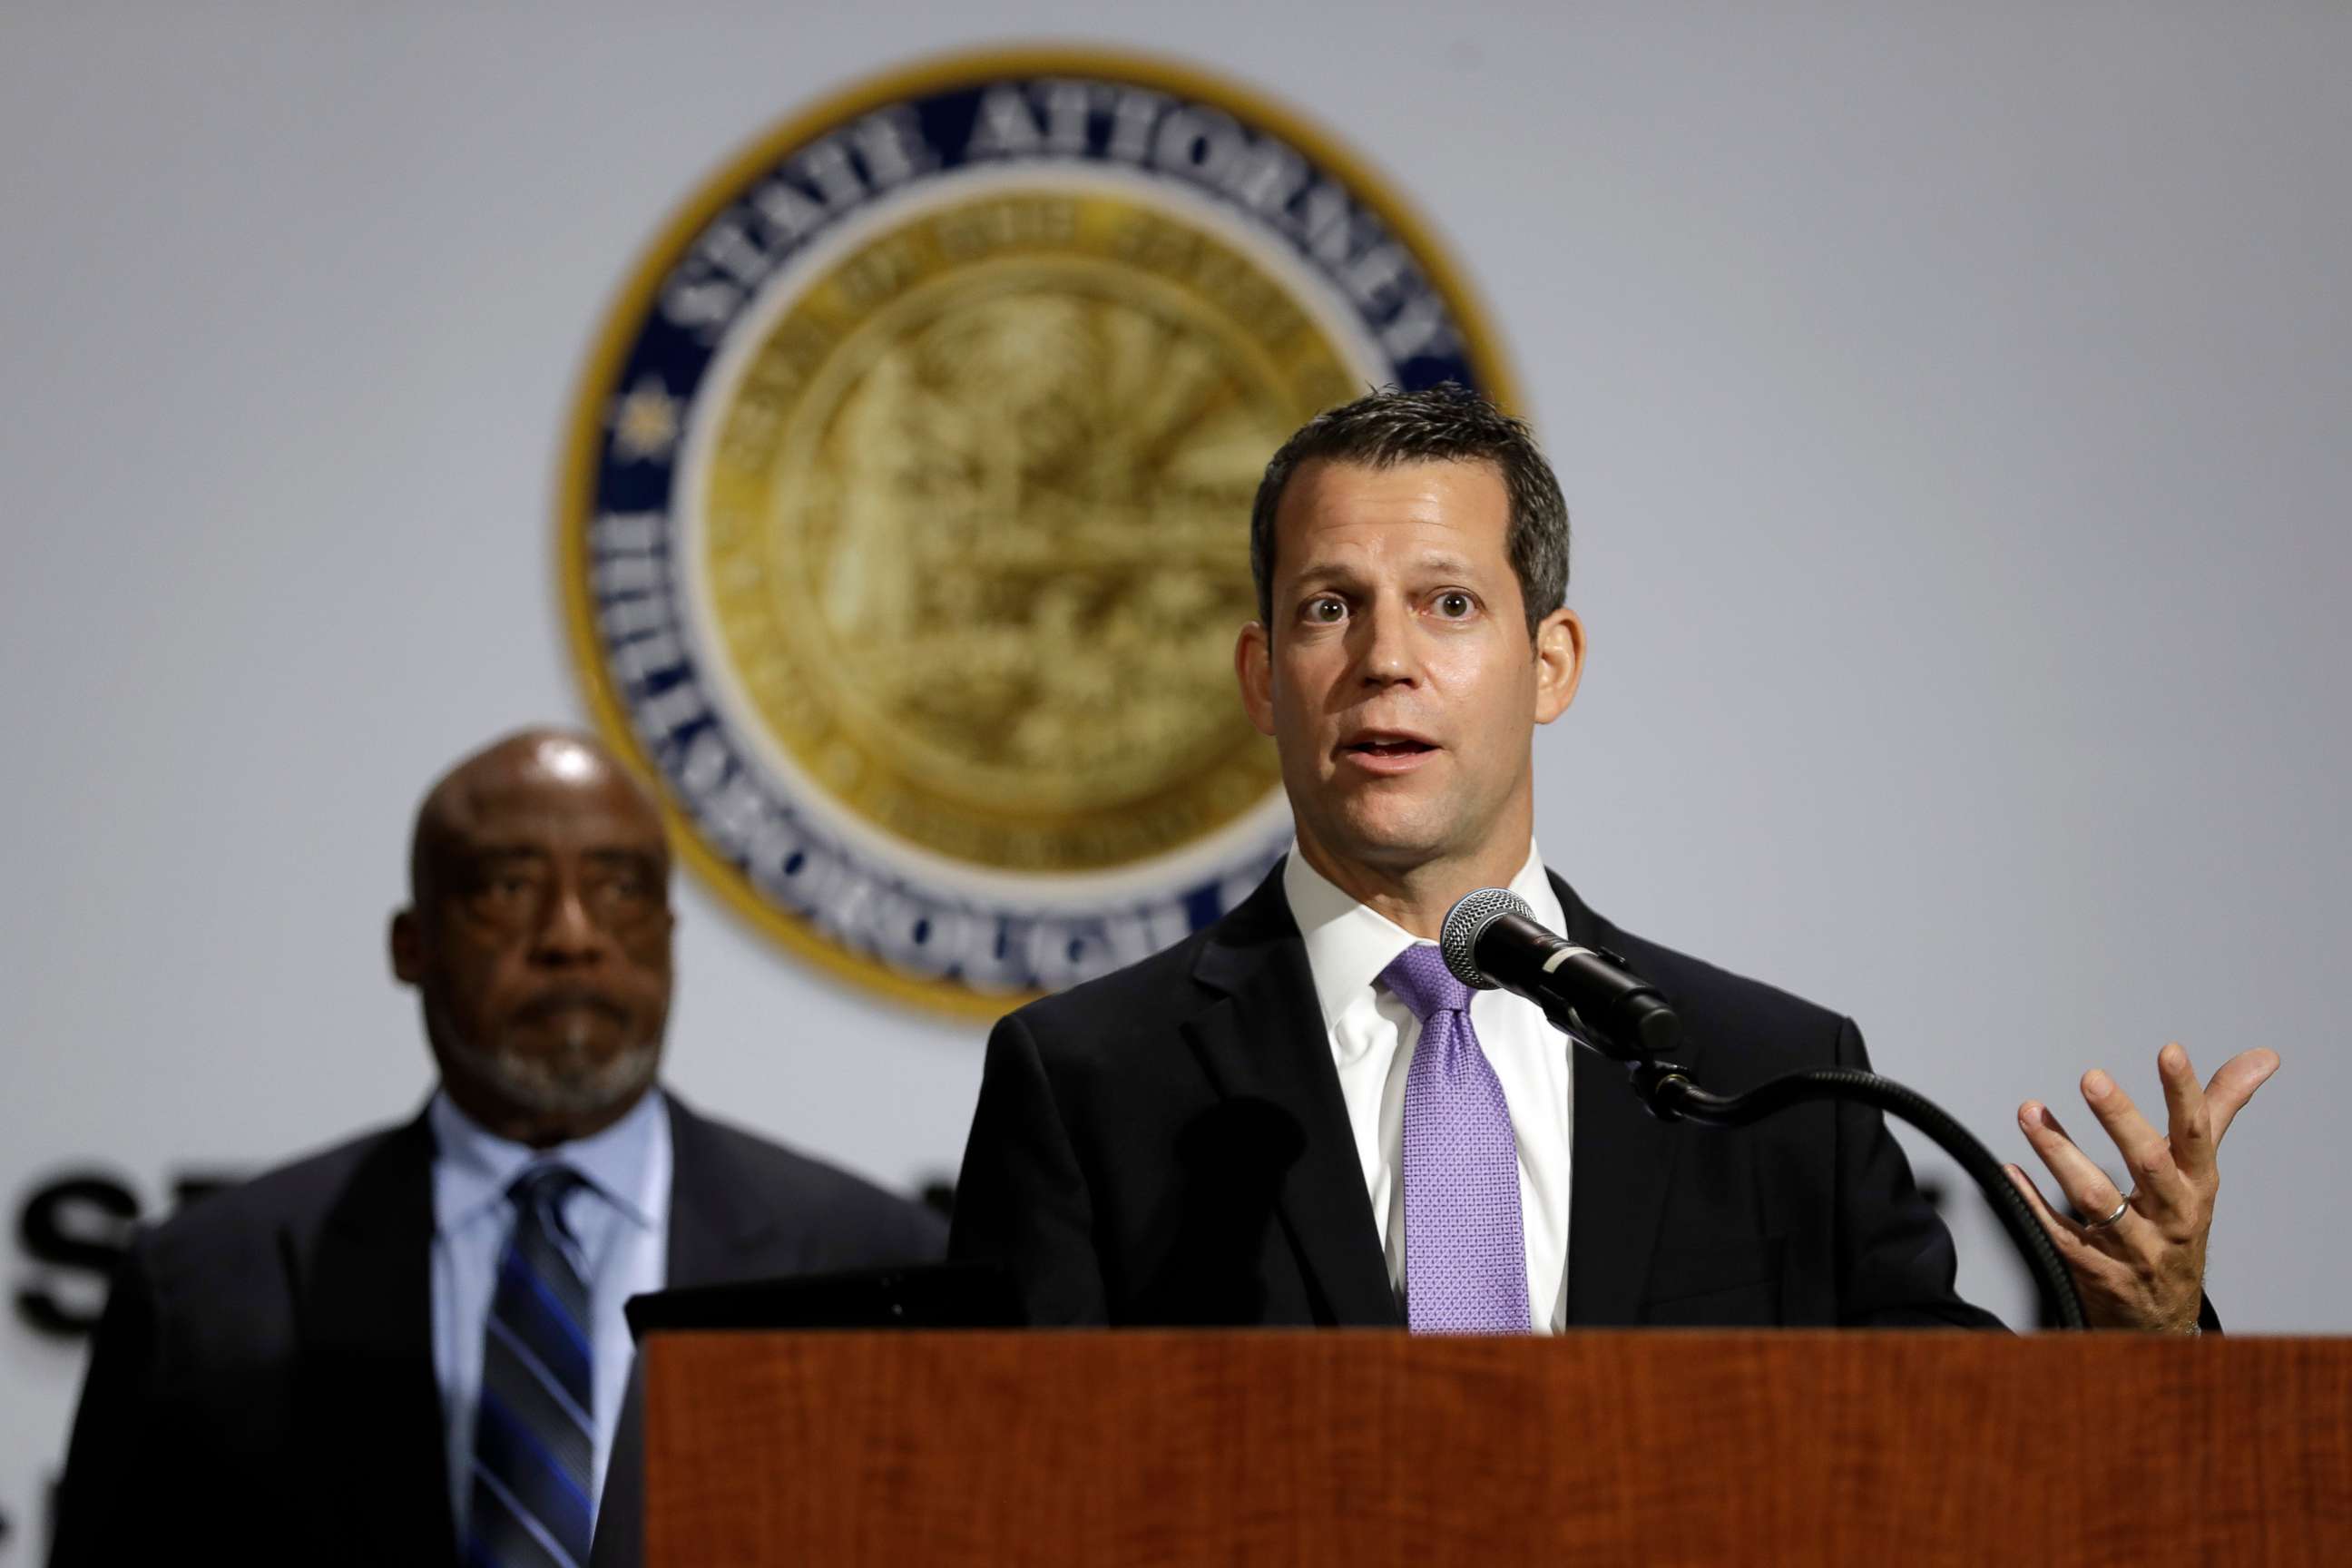 PHOTO: Hillsborough County State Attorney Andrew Warren, right, speaks during a news conference, June 15, 2020, in Tampa, Fla.